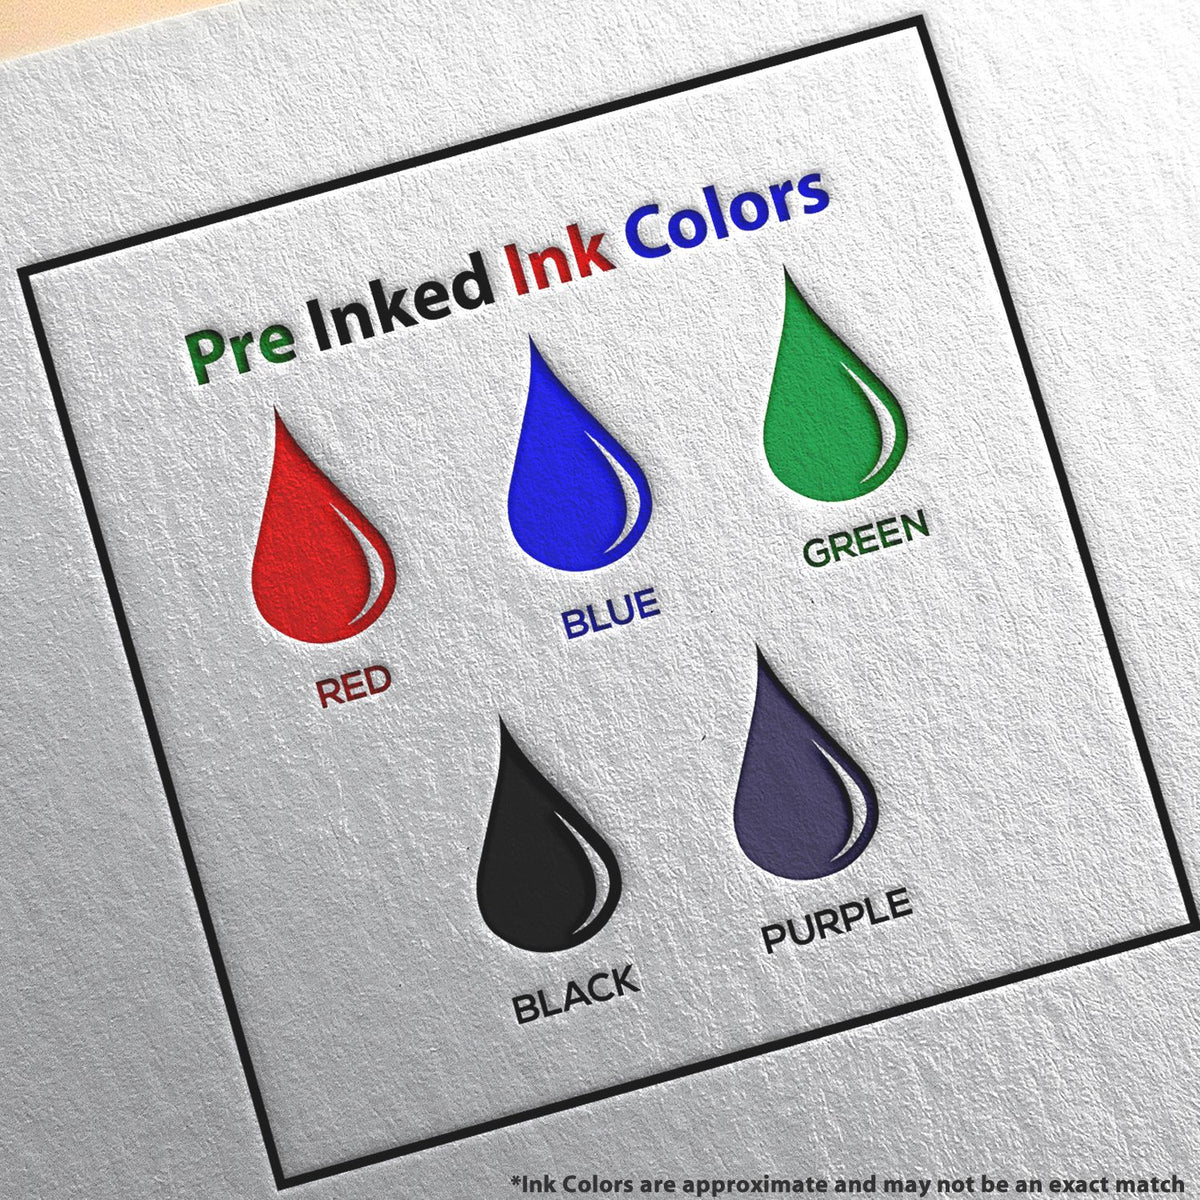 A picture showing the different ink colors or hues available for the Slim Pre-Inked Iowa Professional Geologist Seal Stamp